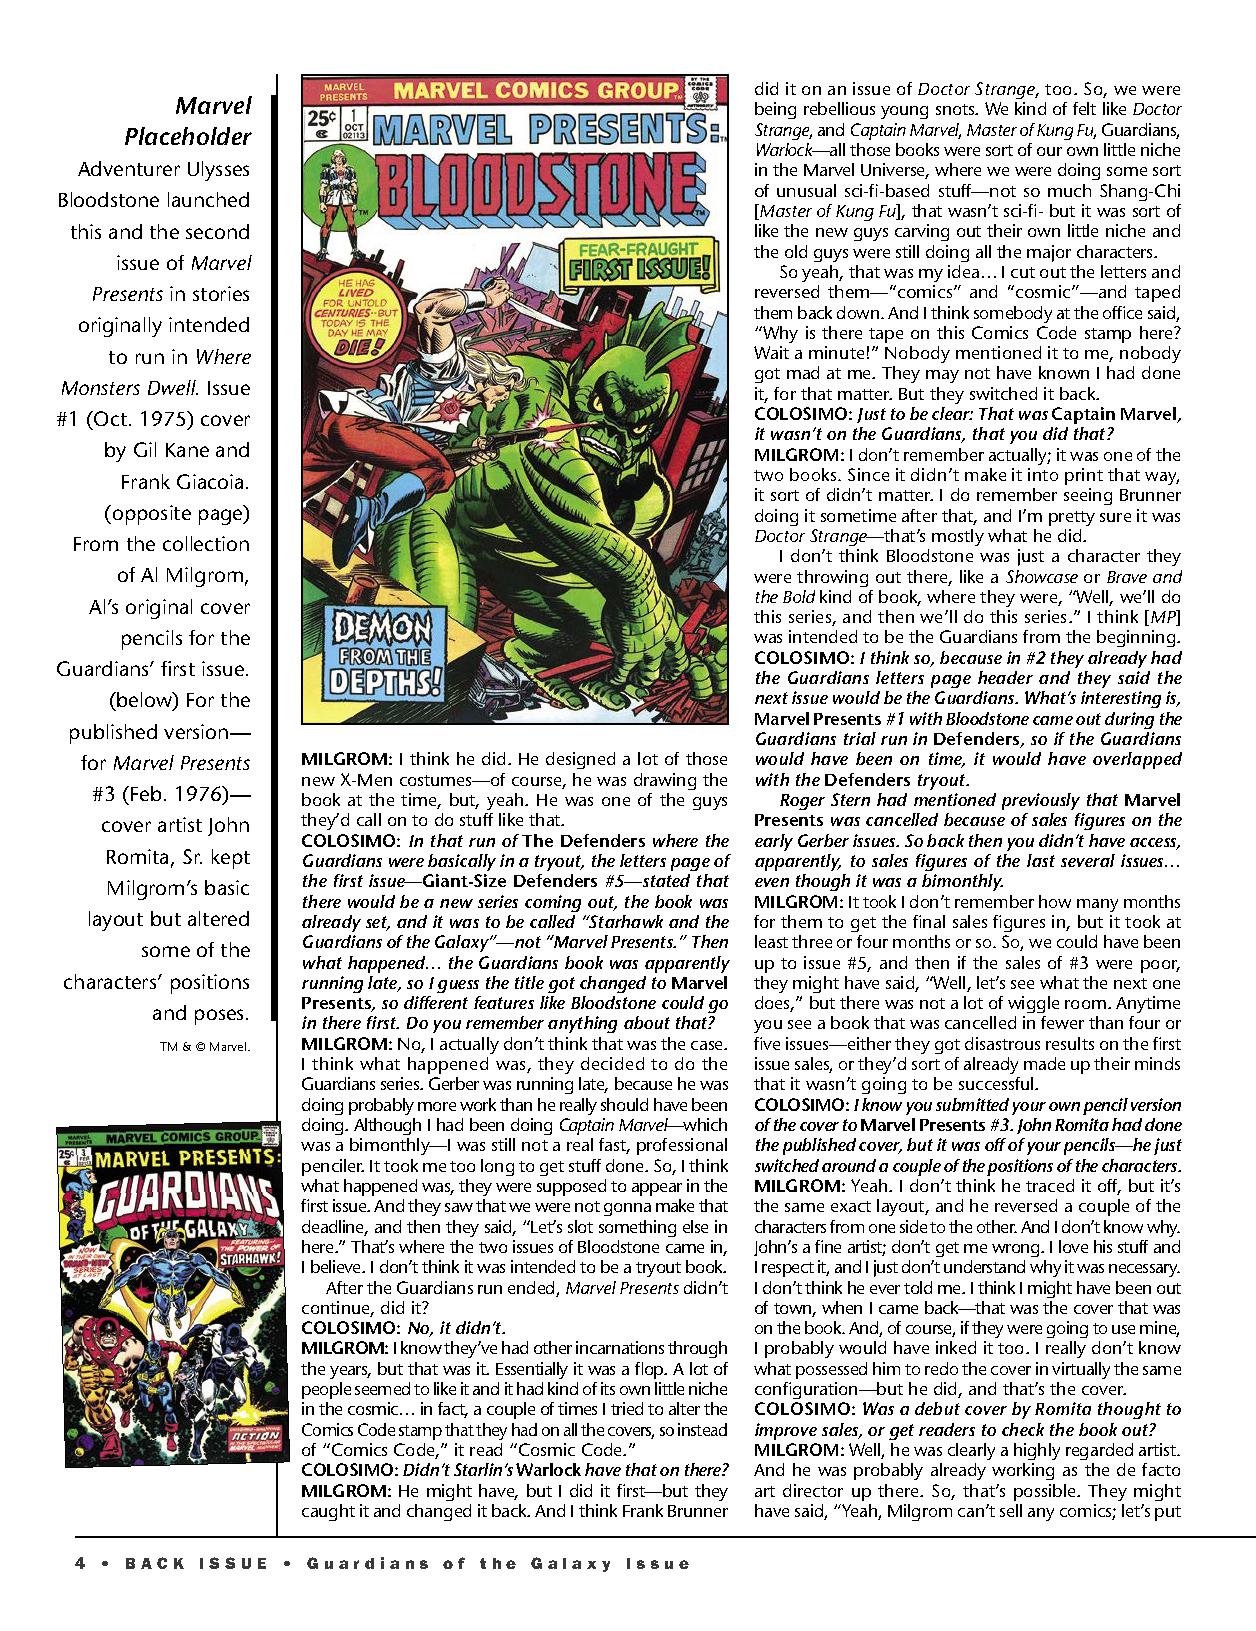 Read online Back Issue comic -  Issue #119 - 6